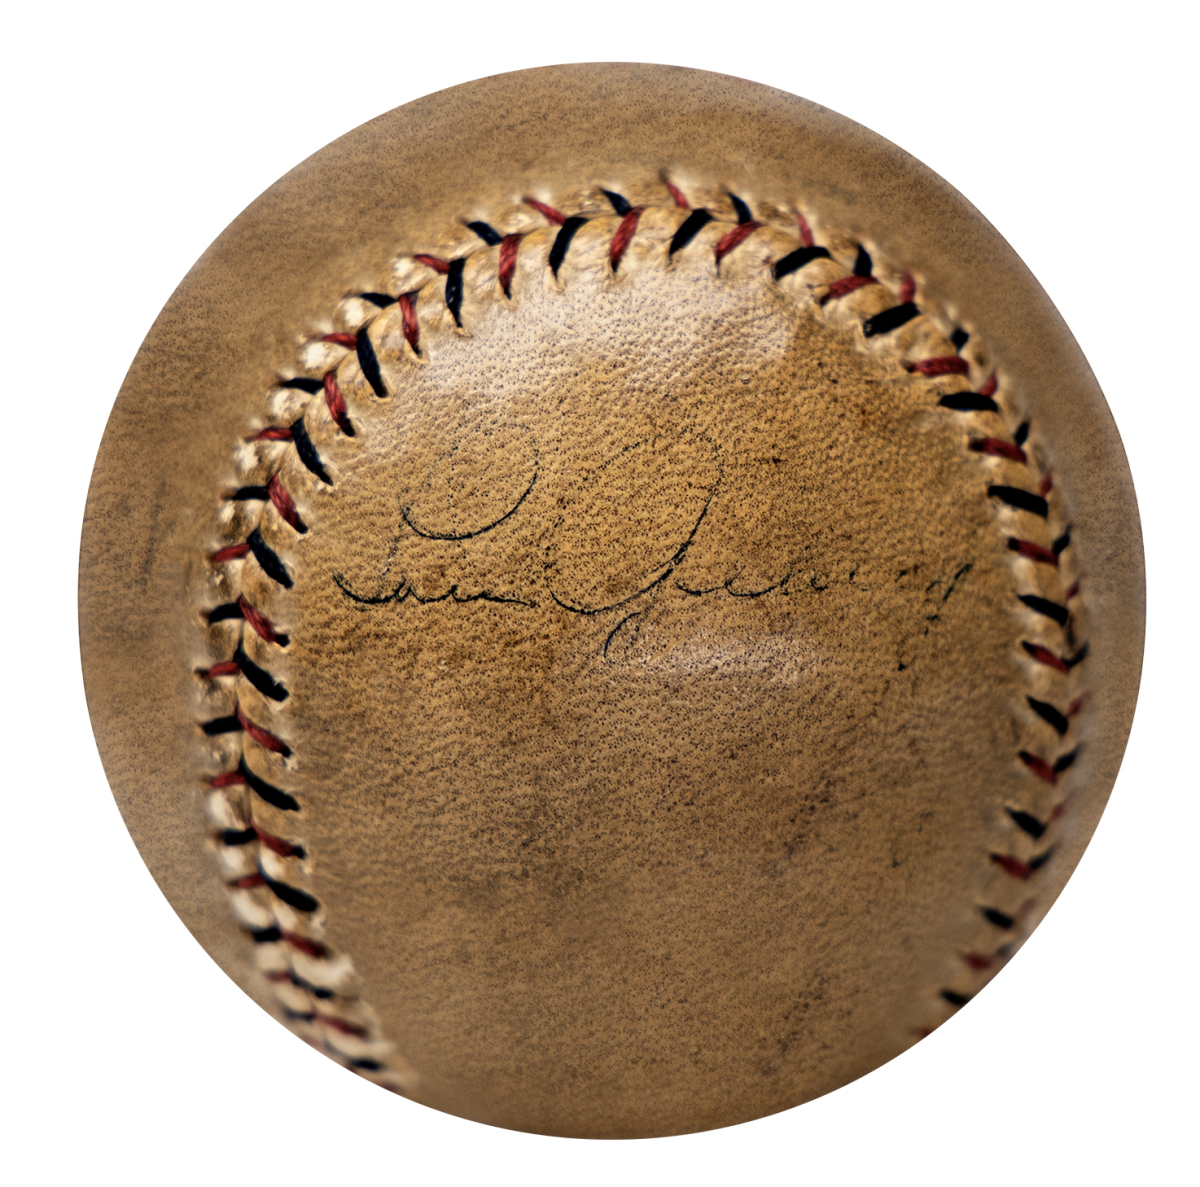 Michael Jordan Signed Baseball From 1976 For Sale, 1st Autograph